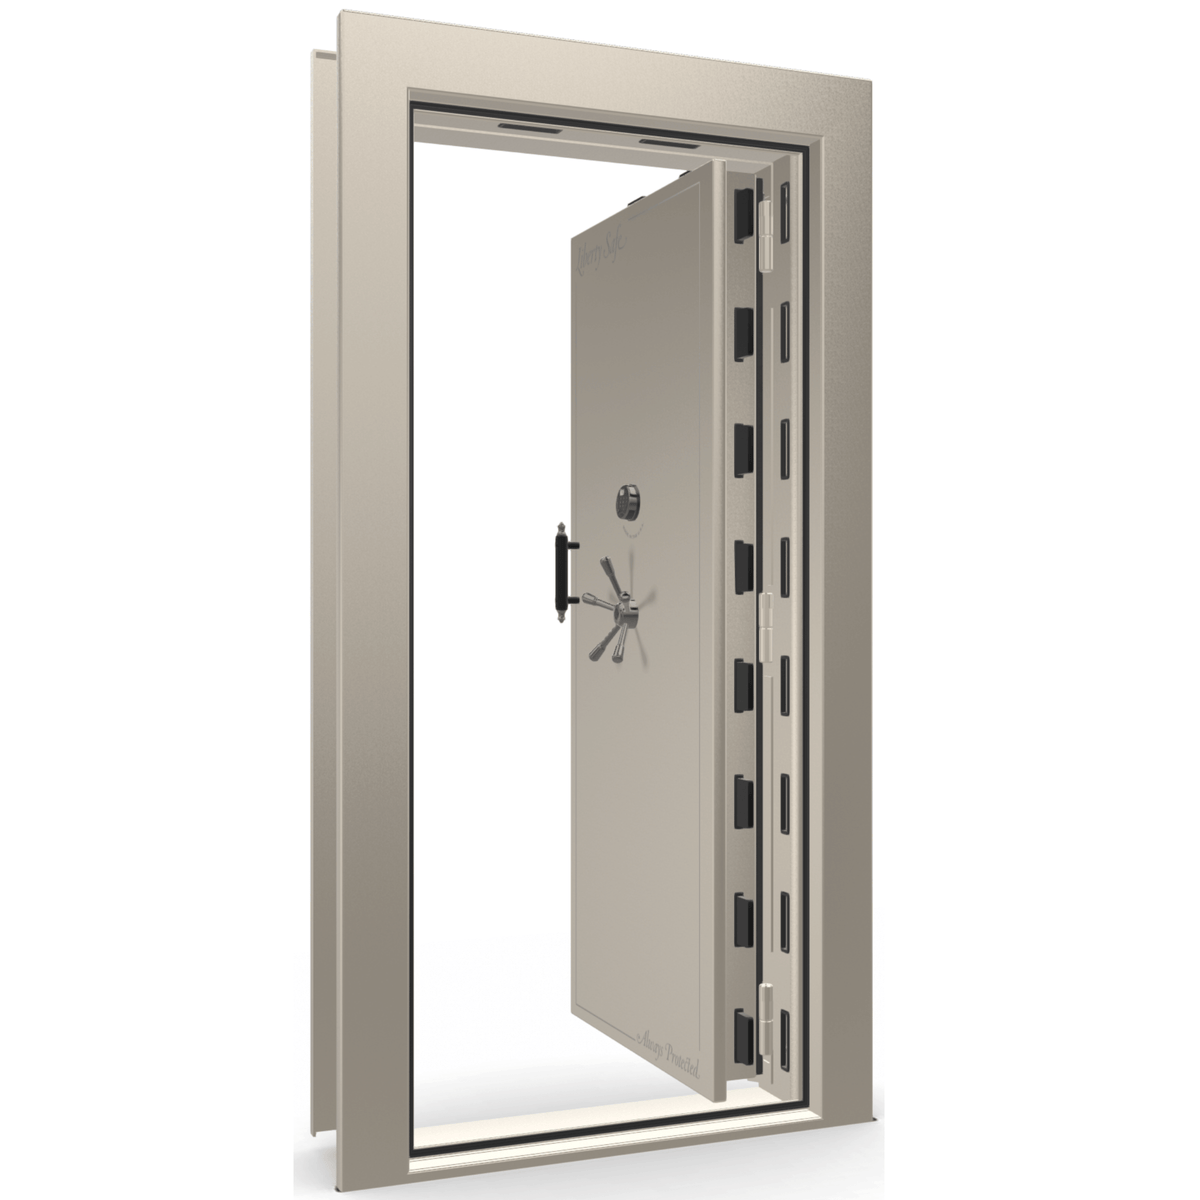 The Beast Vault Door in Champagne Gloss with Black Chrome Electronic Lock, Right Inswing, door open.